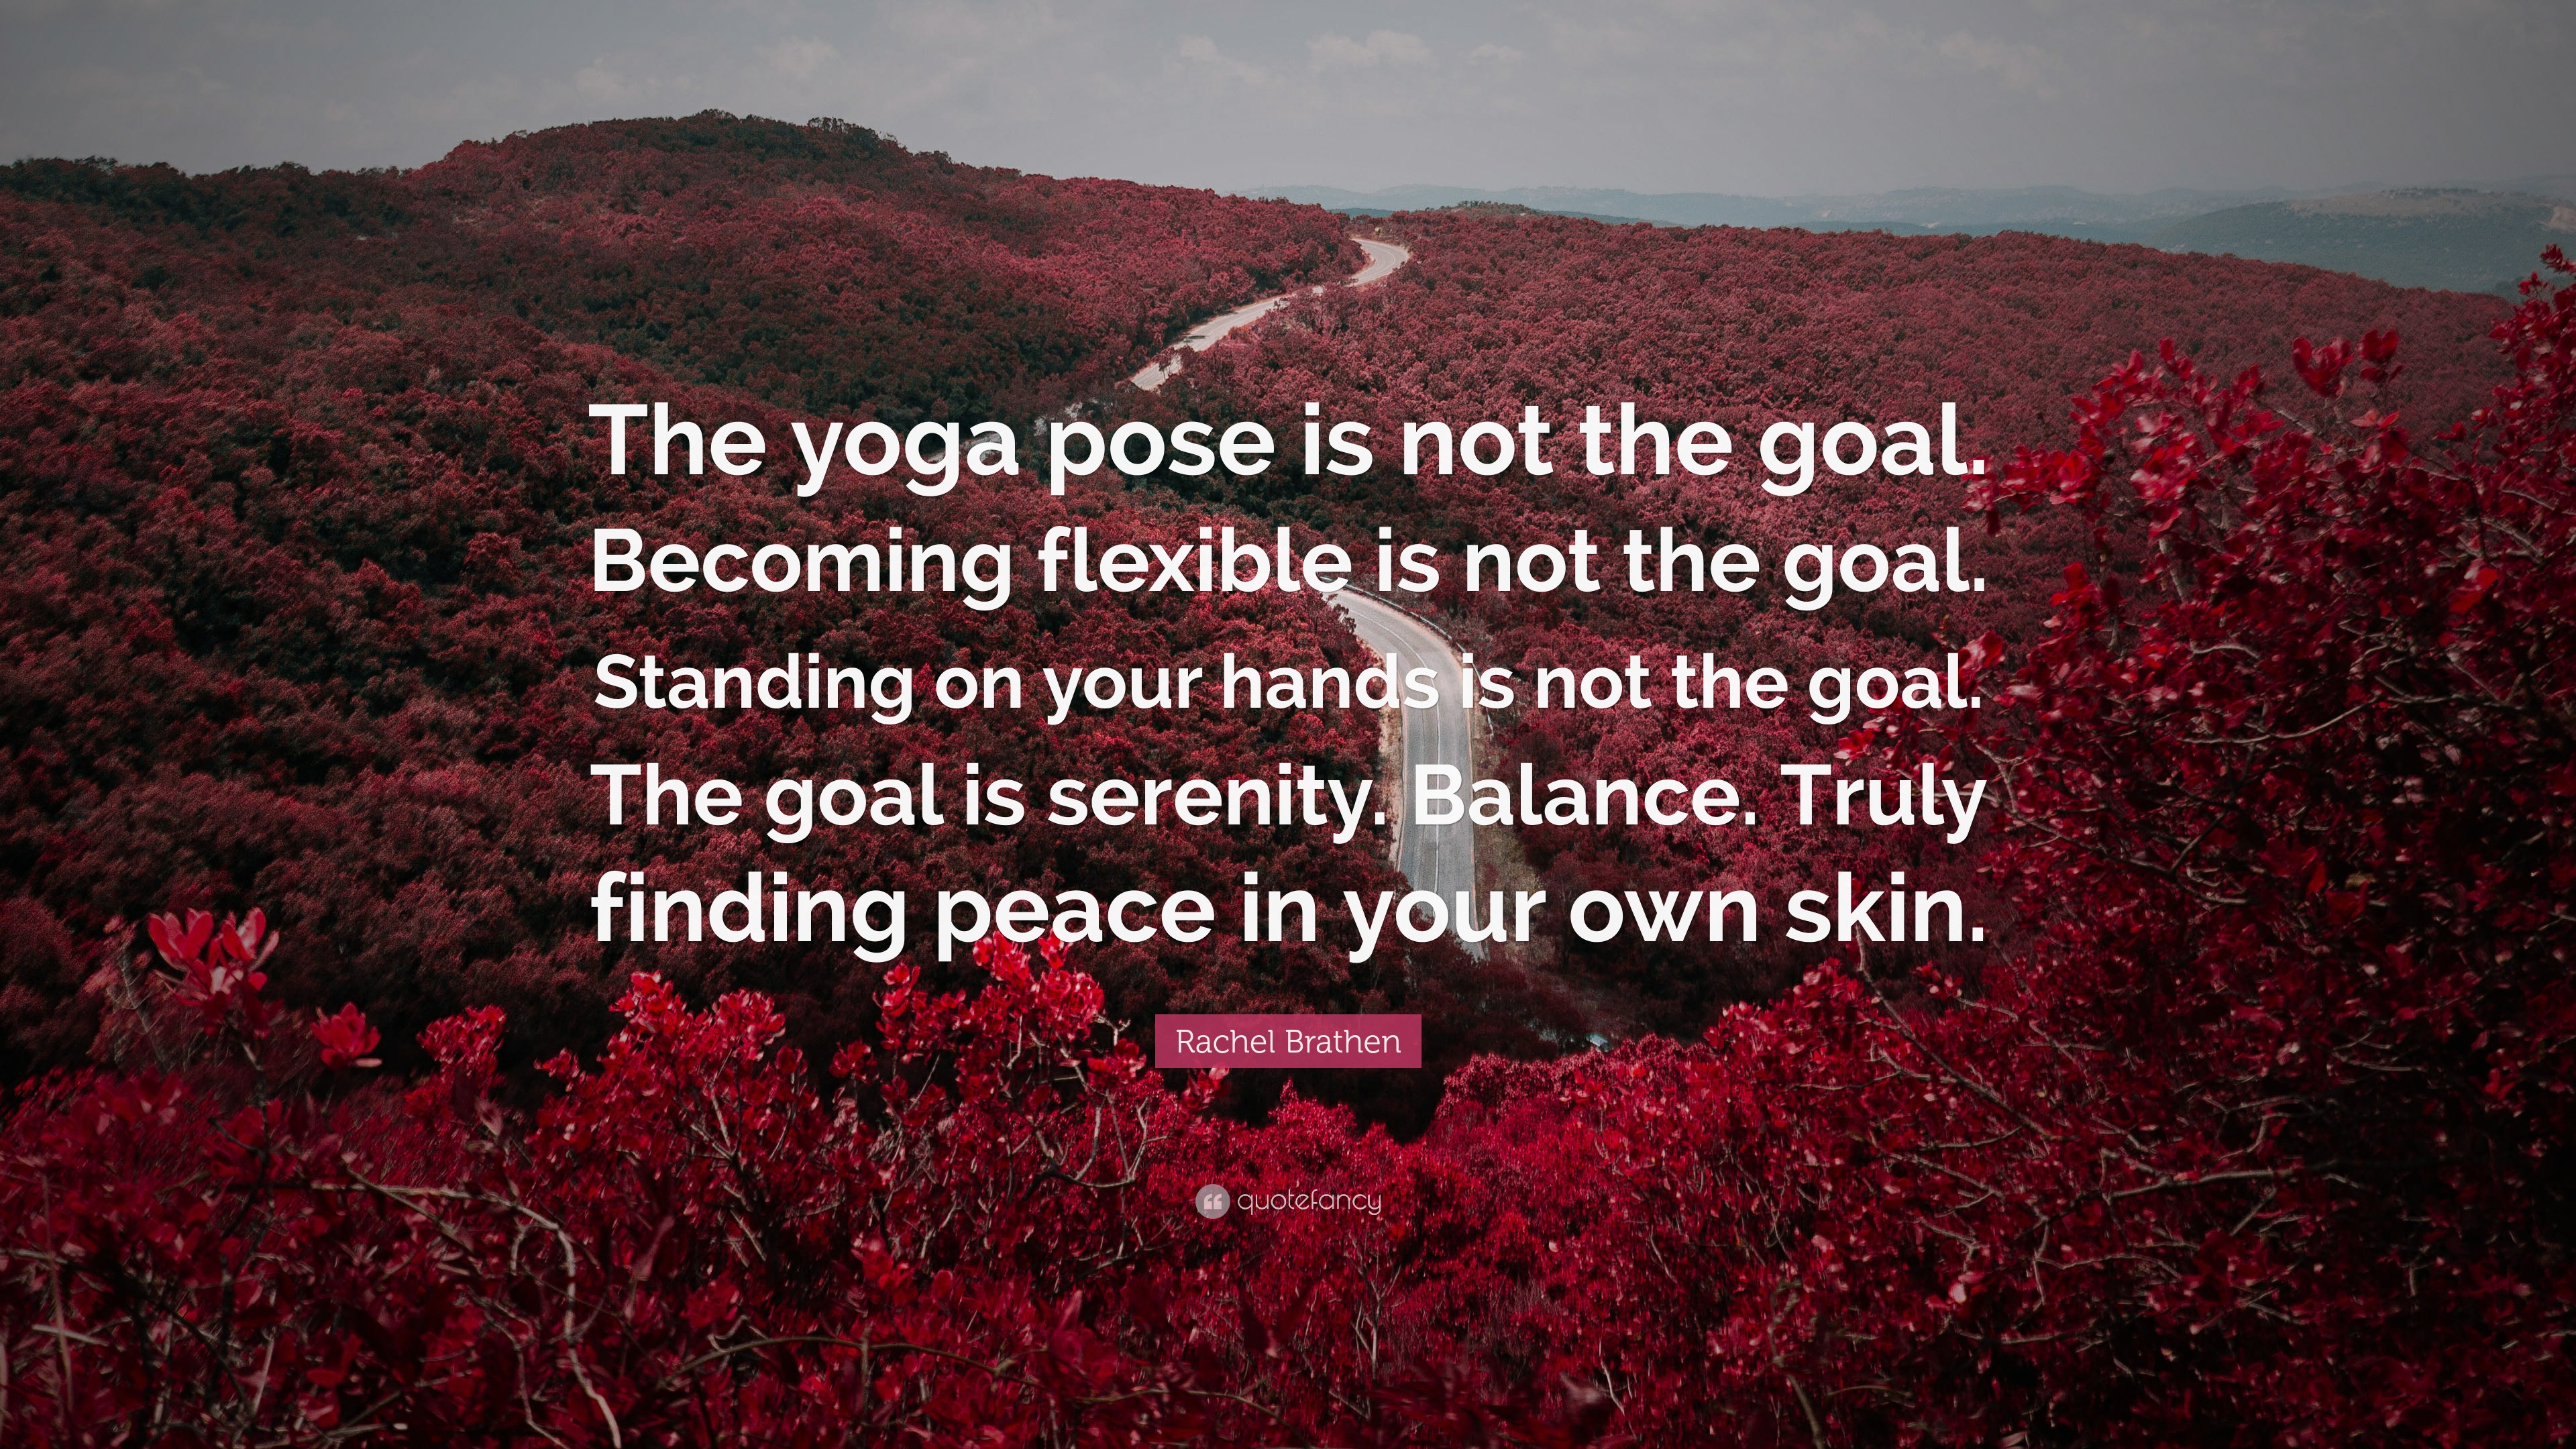 Love the feeling of flight in crane pose :-) | Yoga quotes, Yoga lifestyle  quotes, Yoga inspiration